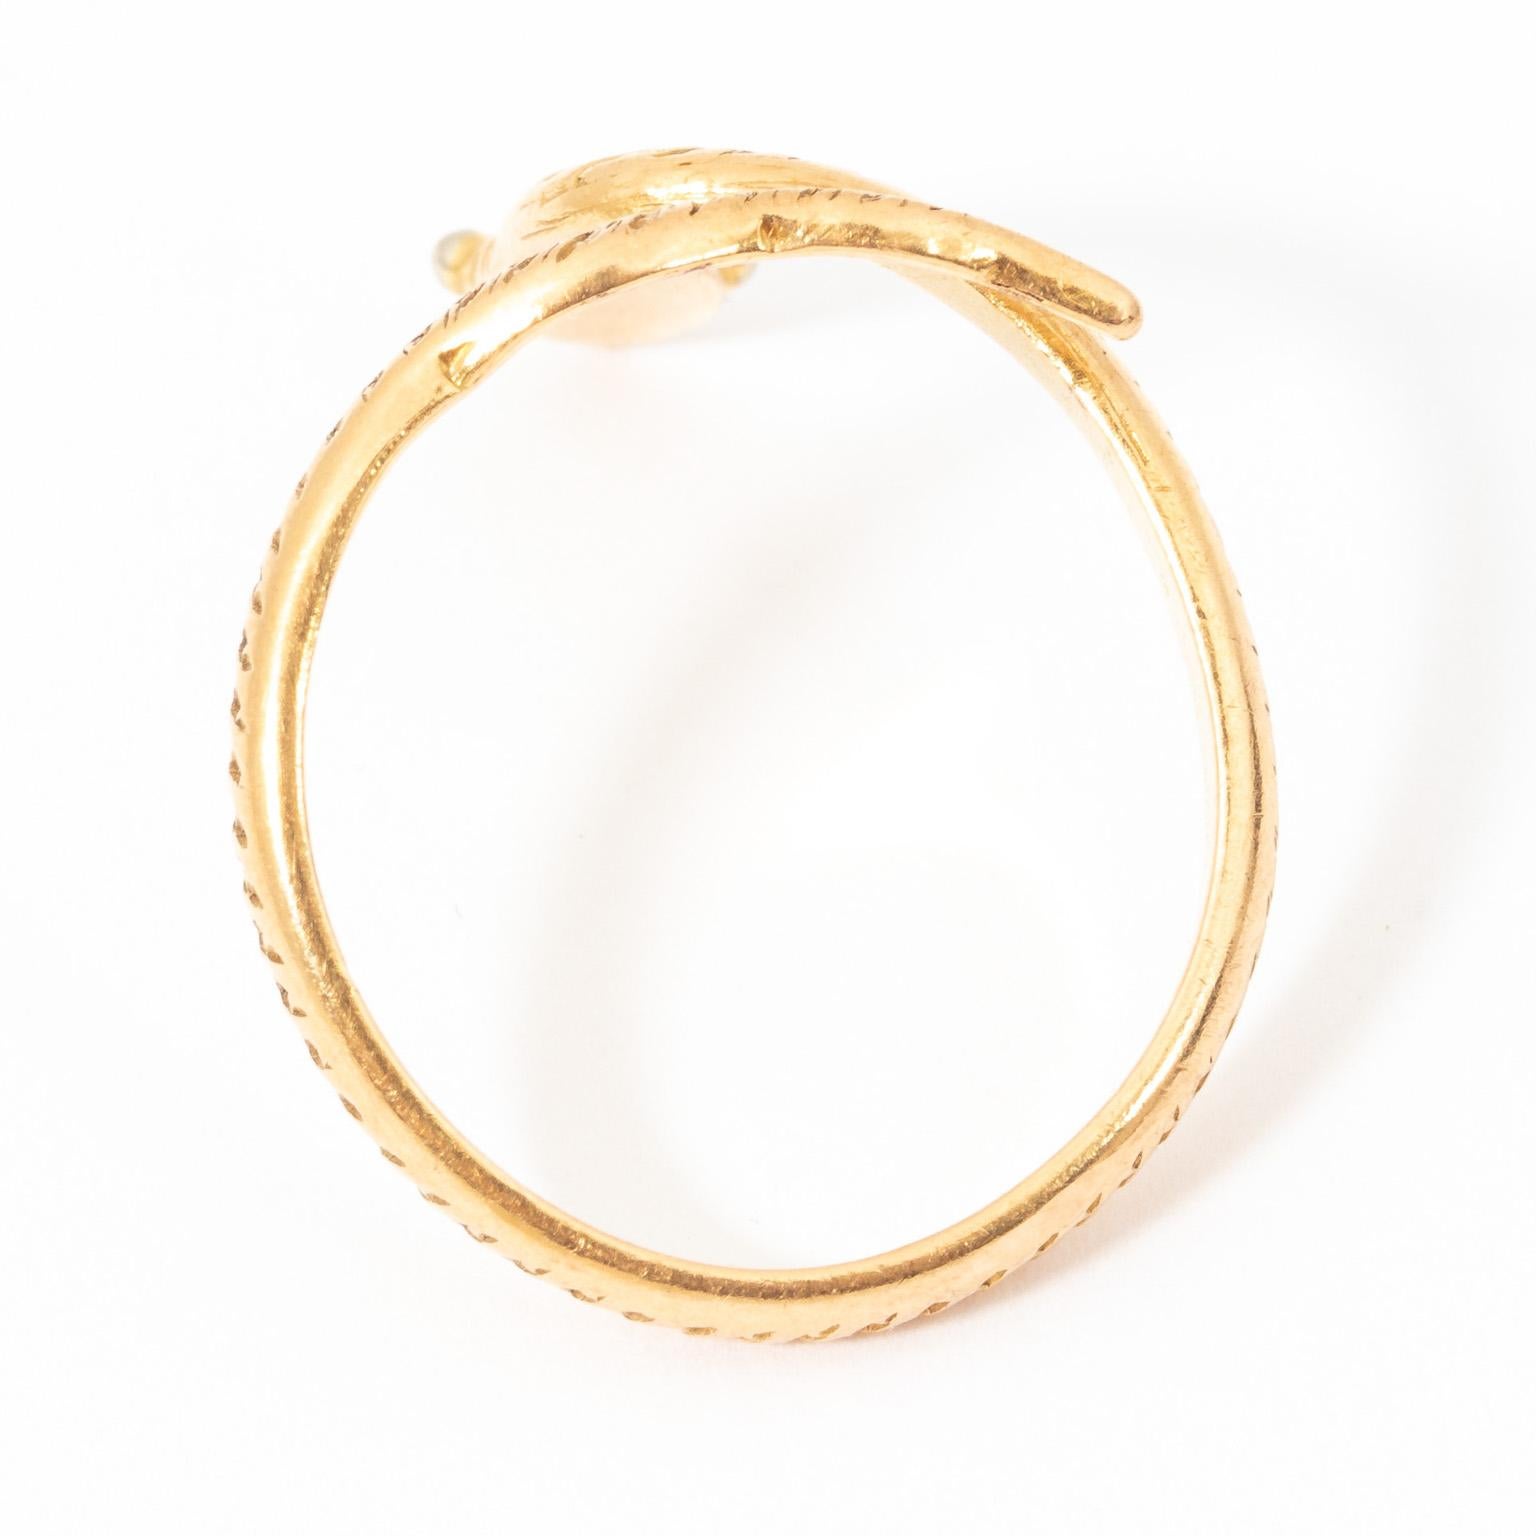 Circa mid-20th century snake ring in 18 Karat Gold. Handmade and can be sized either larger or smaller if necessary. Eyes are detailed with White Gold. Size 7.50. Weight 4.40 Grams.